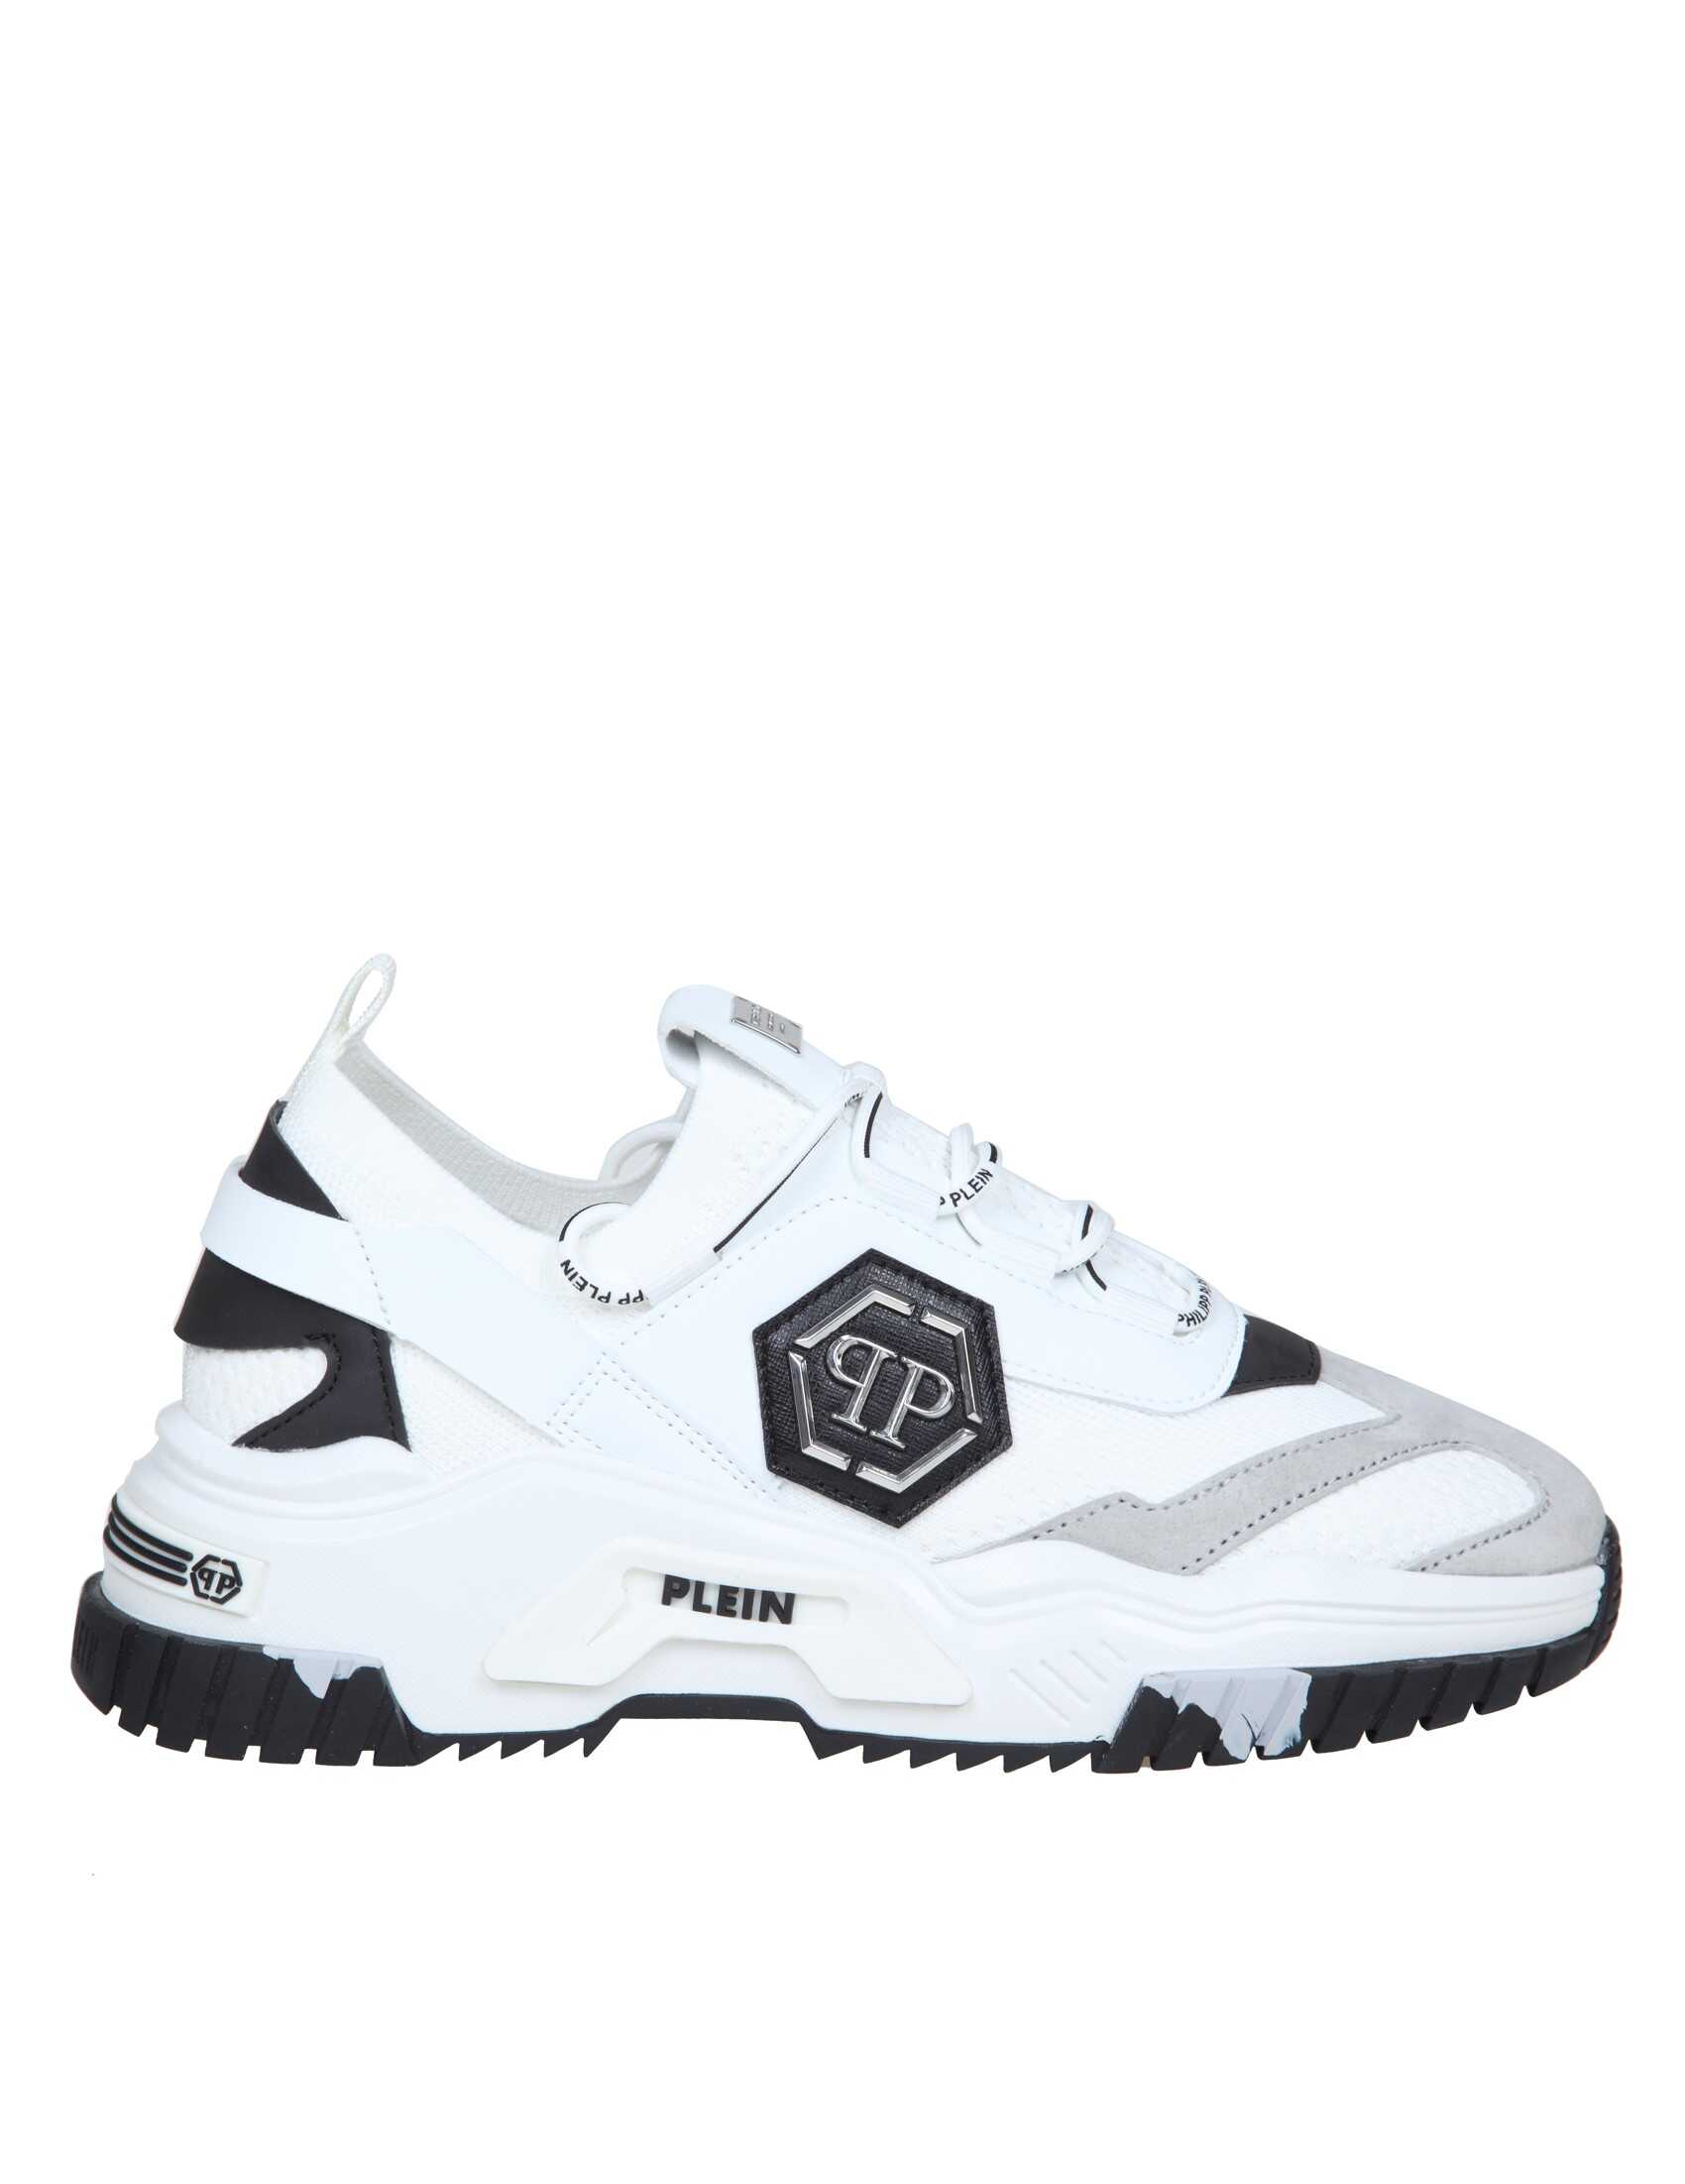 Philipp Plein sneakers trainer predator in fabric and leather White image5